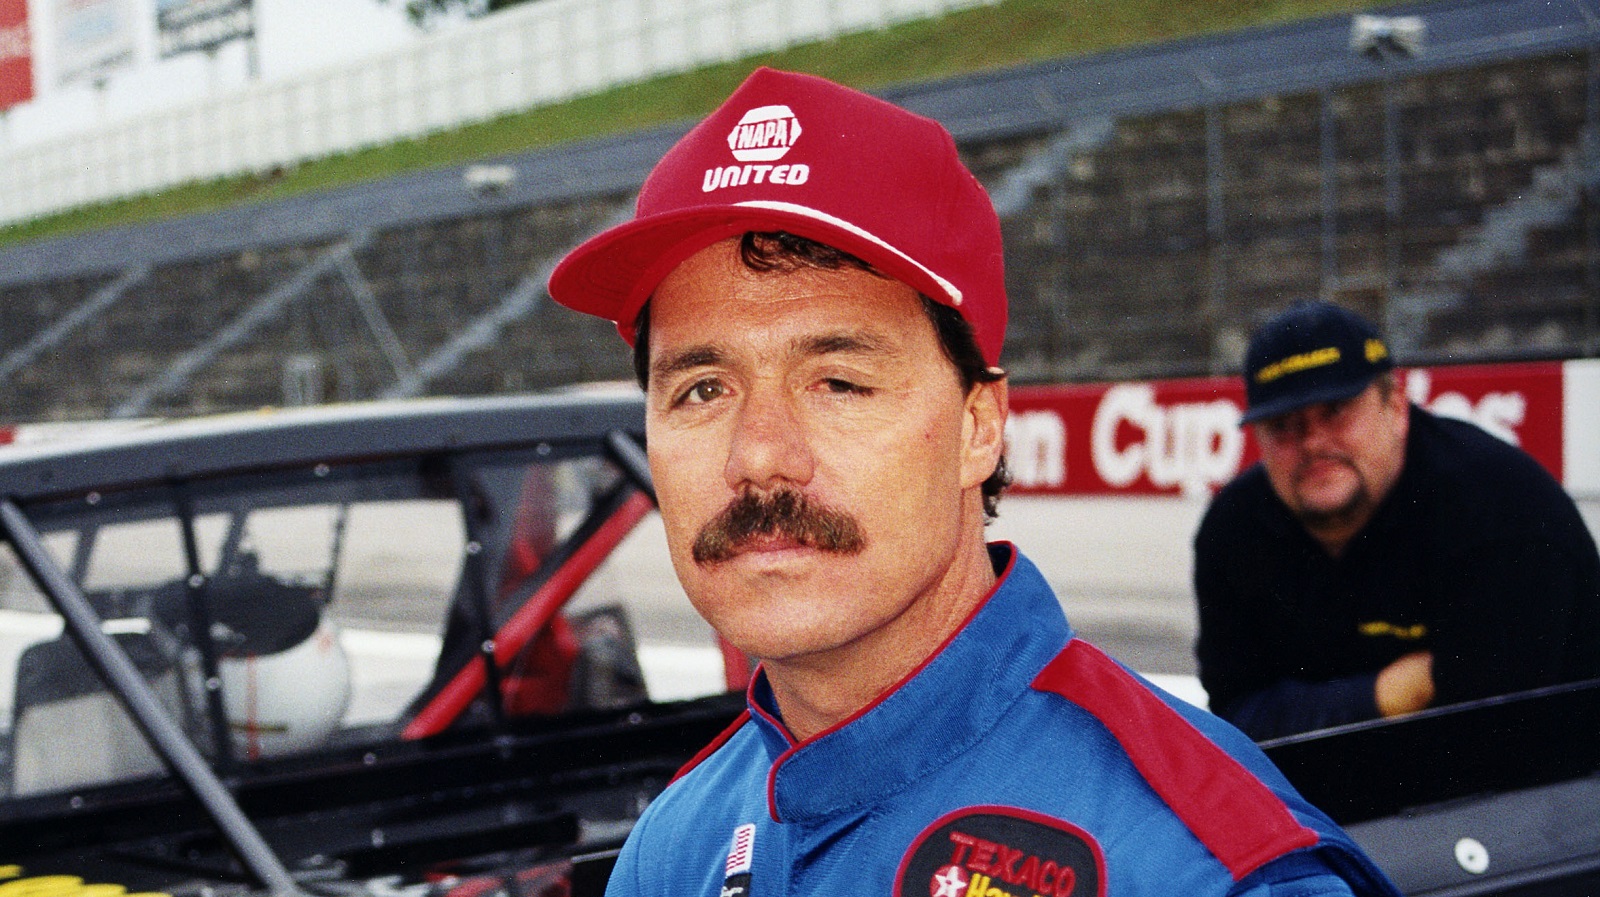 Ernie Irvan made his comeback from a near-fatal 1994 NASCAR Cup practice crash by entering three races in the truck series the following year in his own NAPA-sponsored Ford F-150.  | ISC Images & Archives via Getty Images